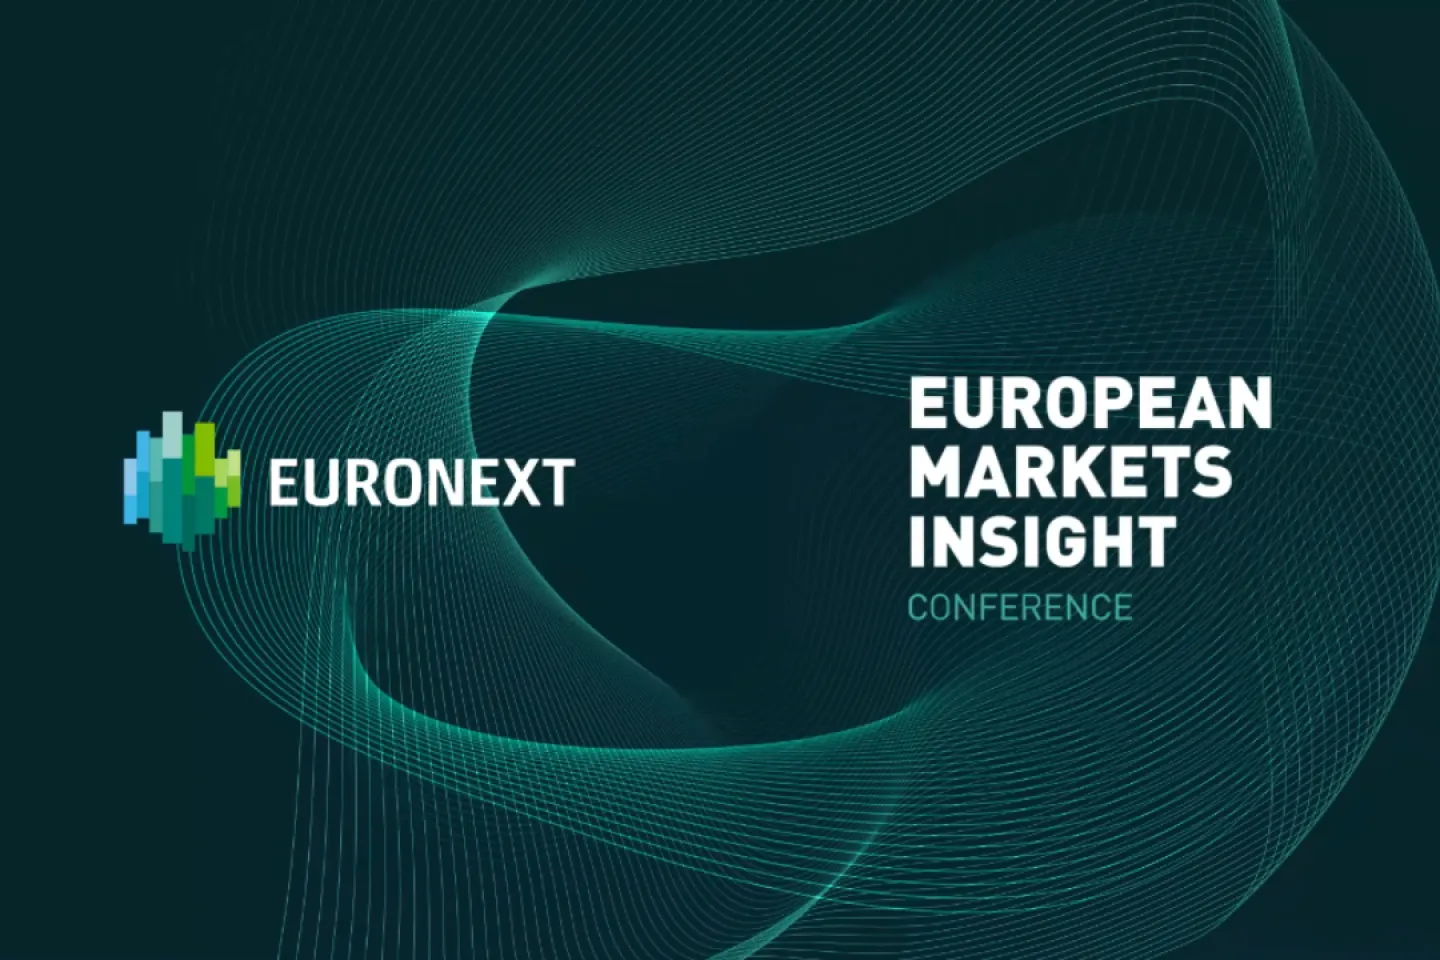 European Markets Insight Conference